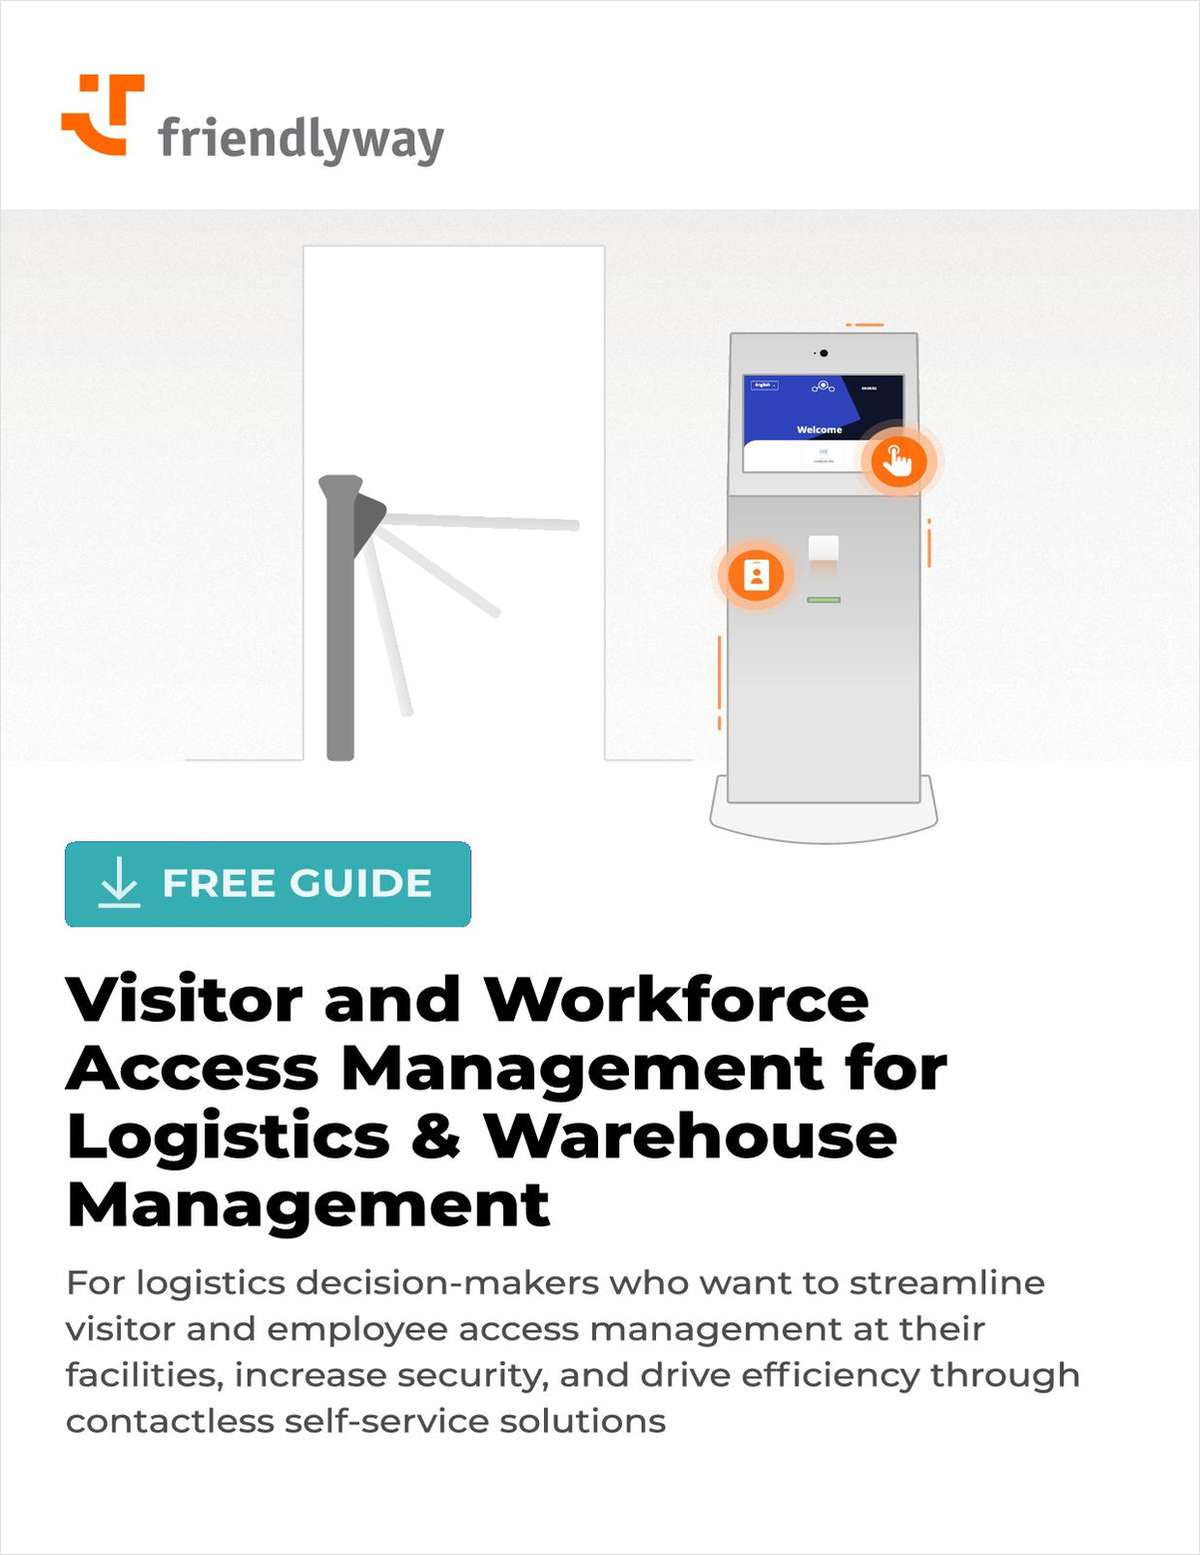 2022 Guide to Visitor and Workforce Access Management for Logistics and Warehouse Management: Leverage Cloud & Self-Service Solutions to Become a More Efficient & Productive Organization Post-COVID